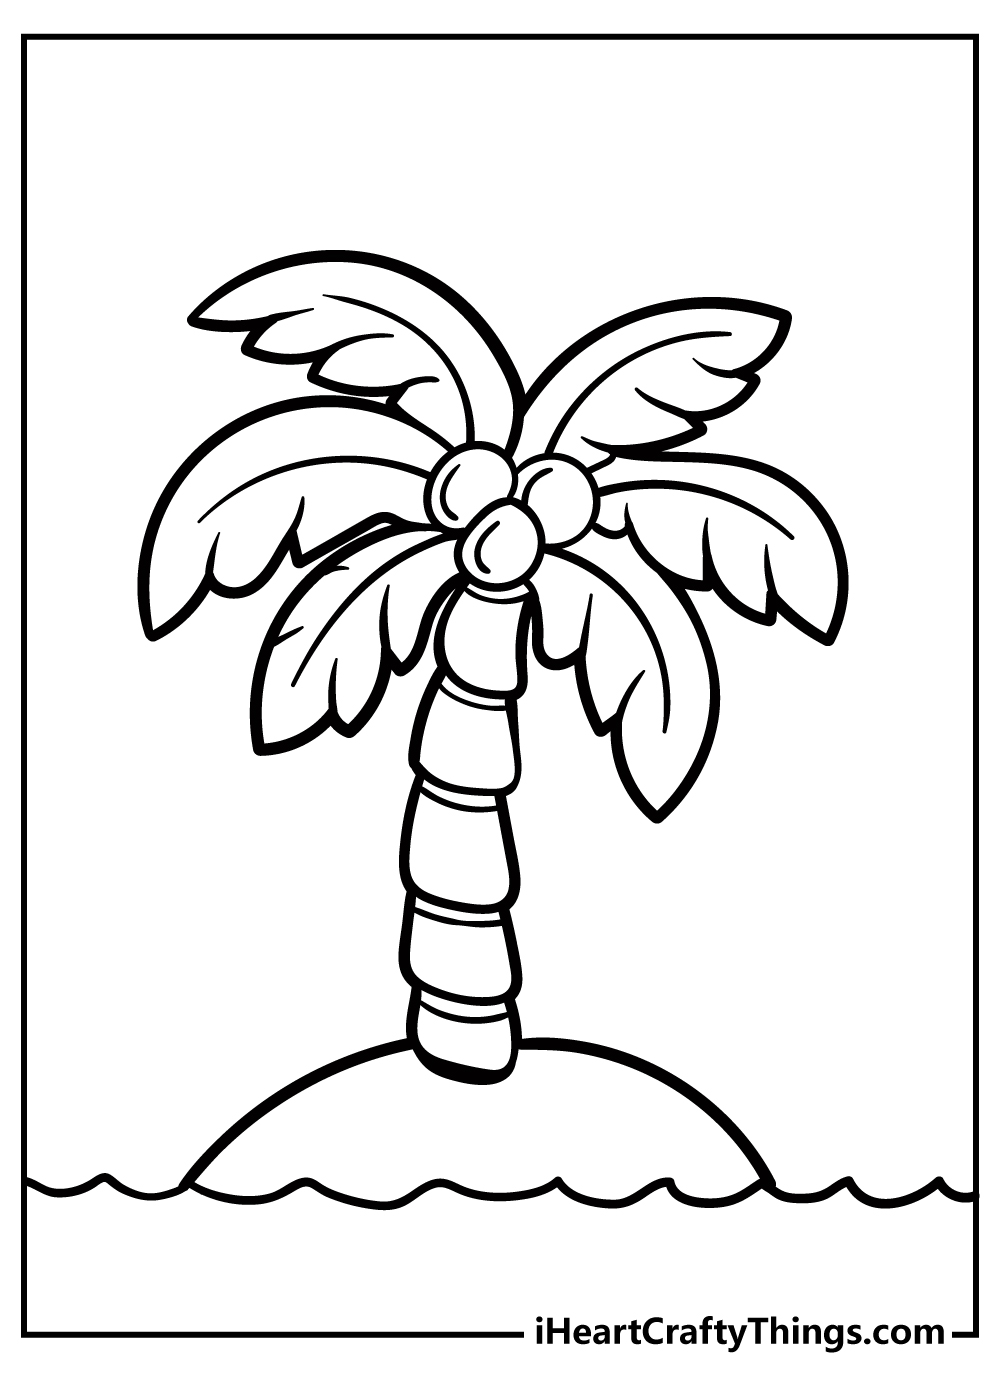 Palm tree coloring pages free printables